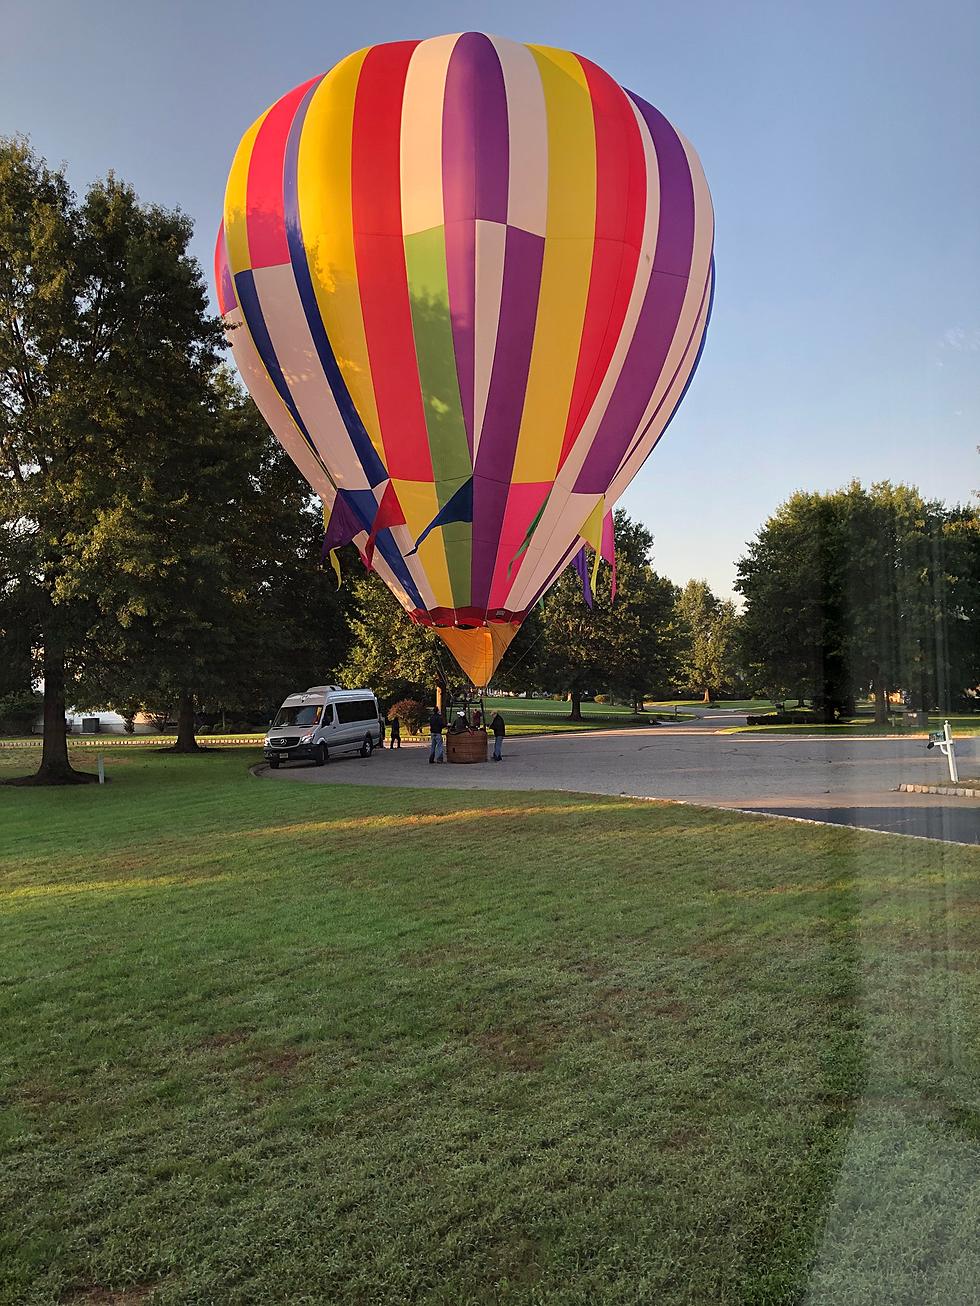 Photos of a hot air balloon that landed right by my house this weekend